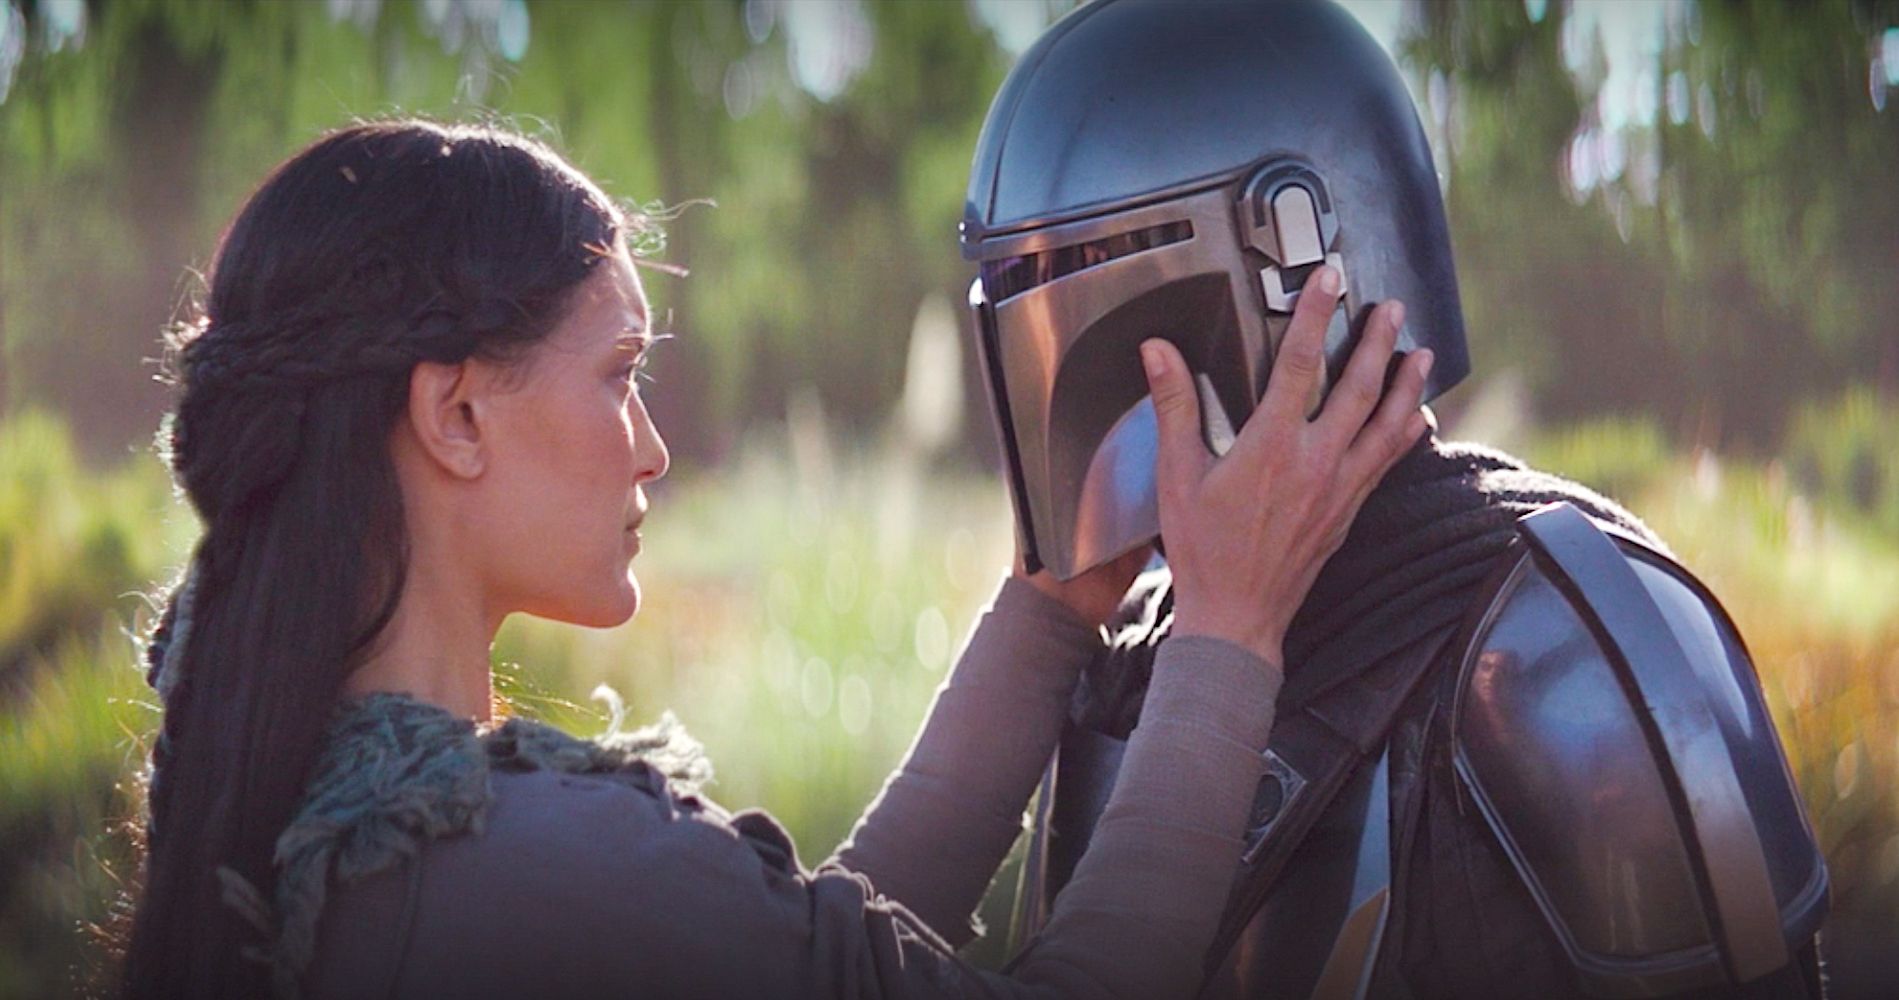 Why The Mandalorian Star Pedro Pascal Agreed to Wear a Helmet for Most of the Series